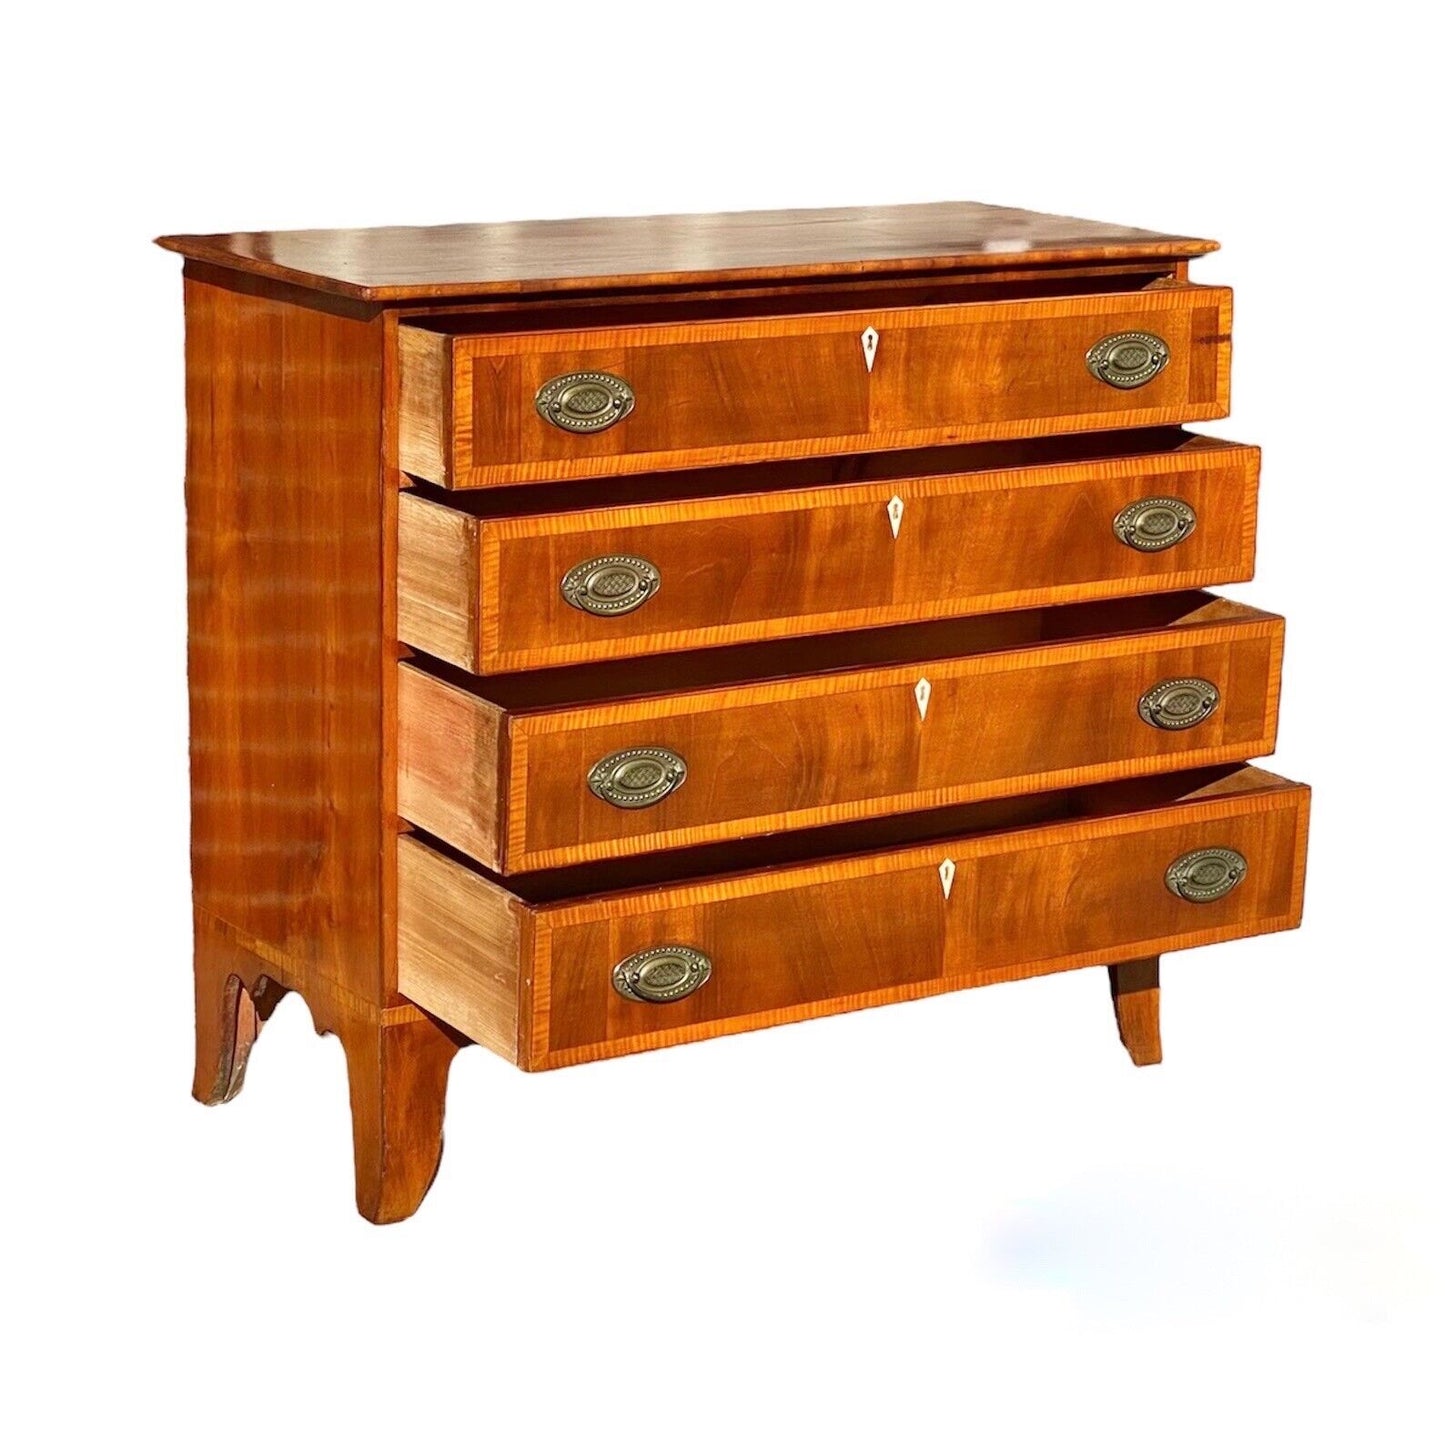 Antique Cherry & Tiger Maple Hepplewhite Chest of Drawers - Spooner & Fitts